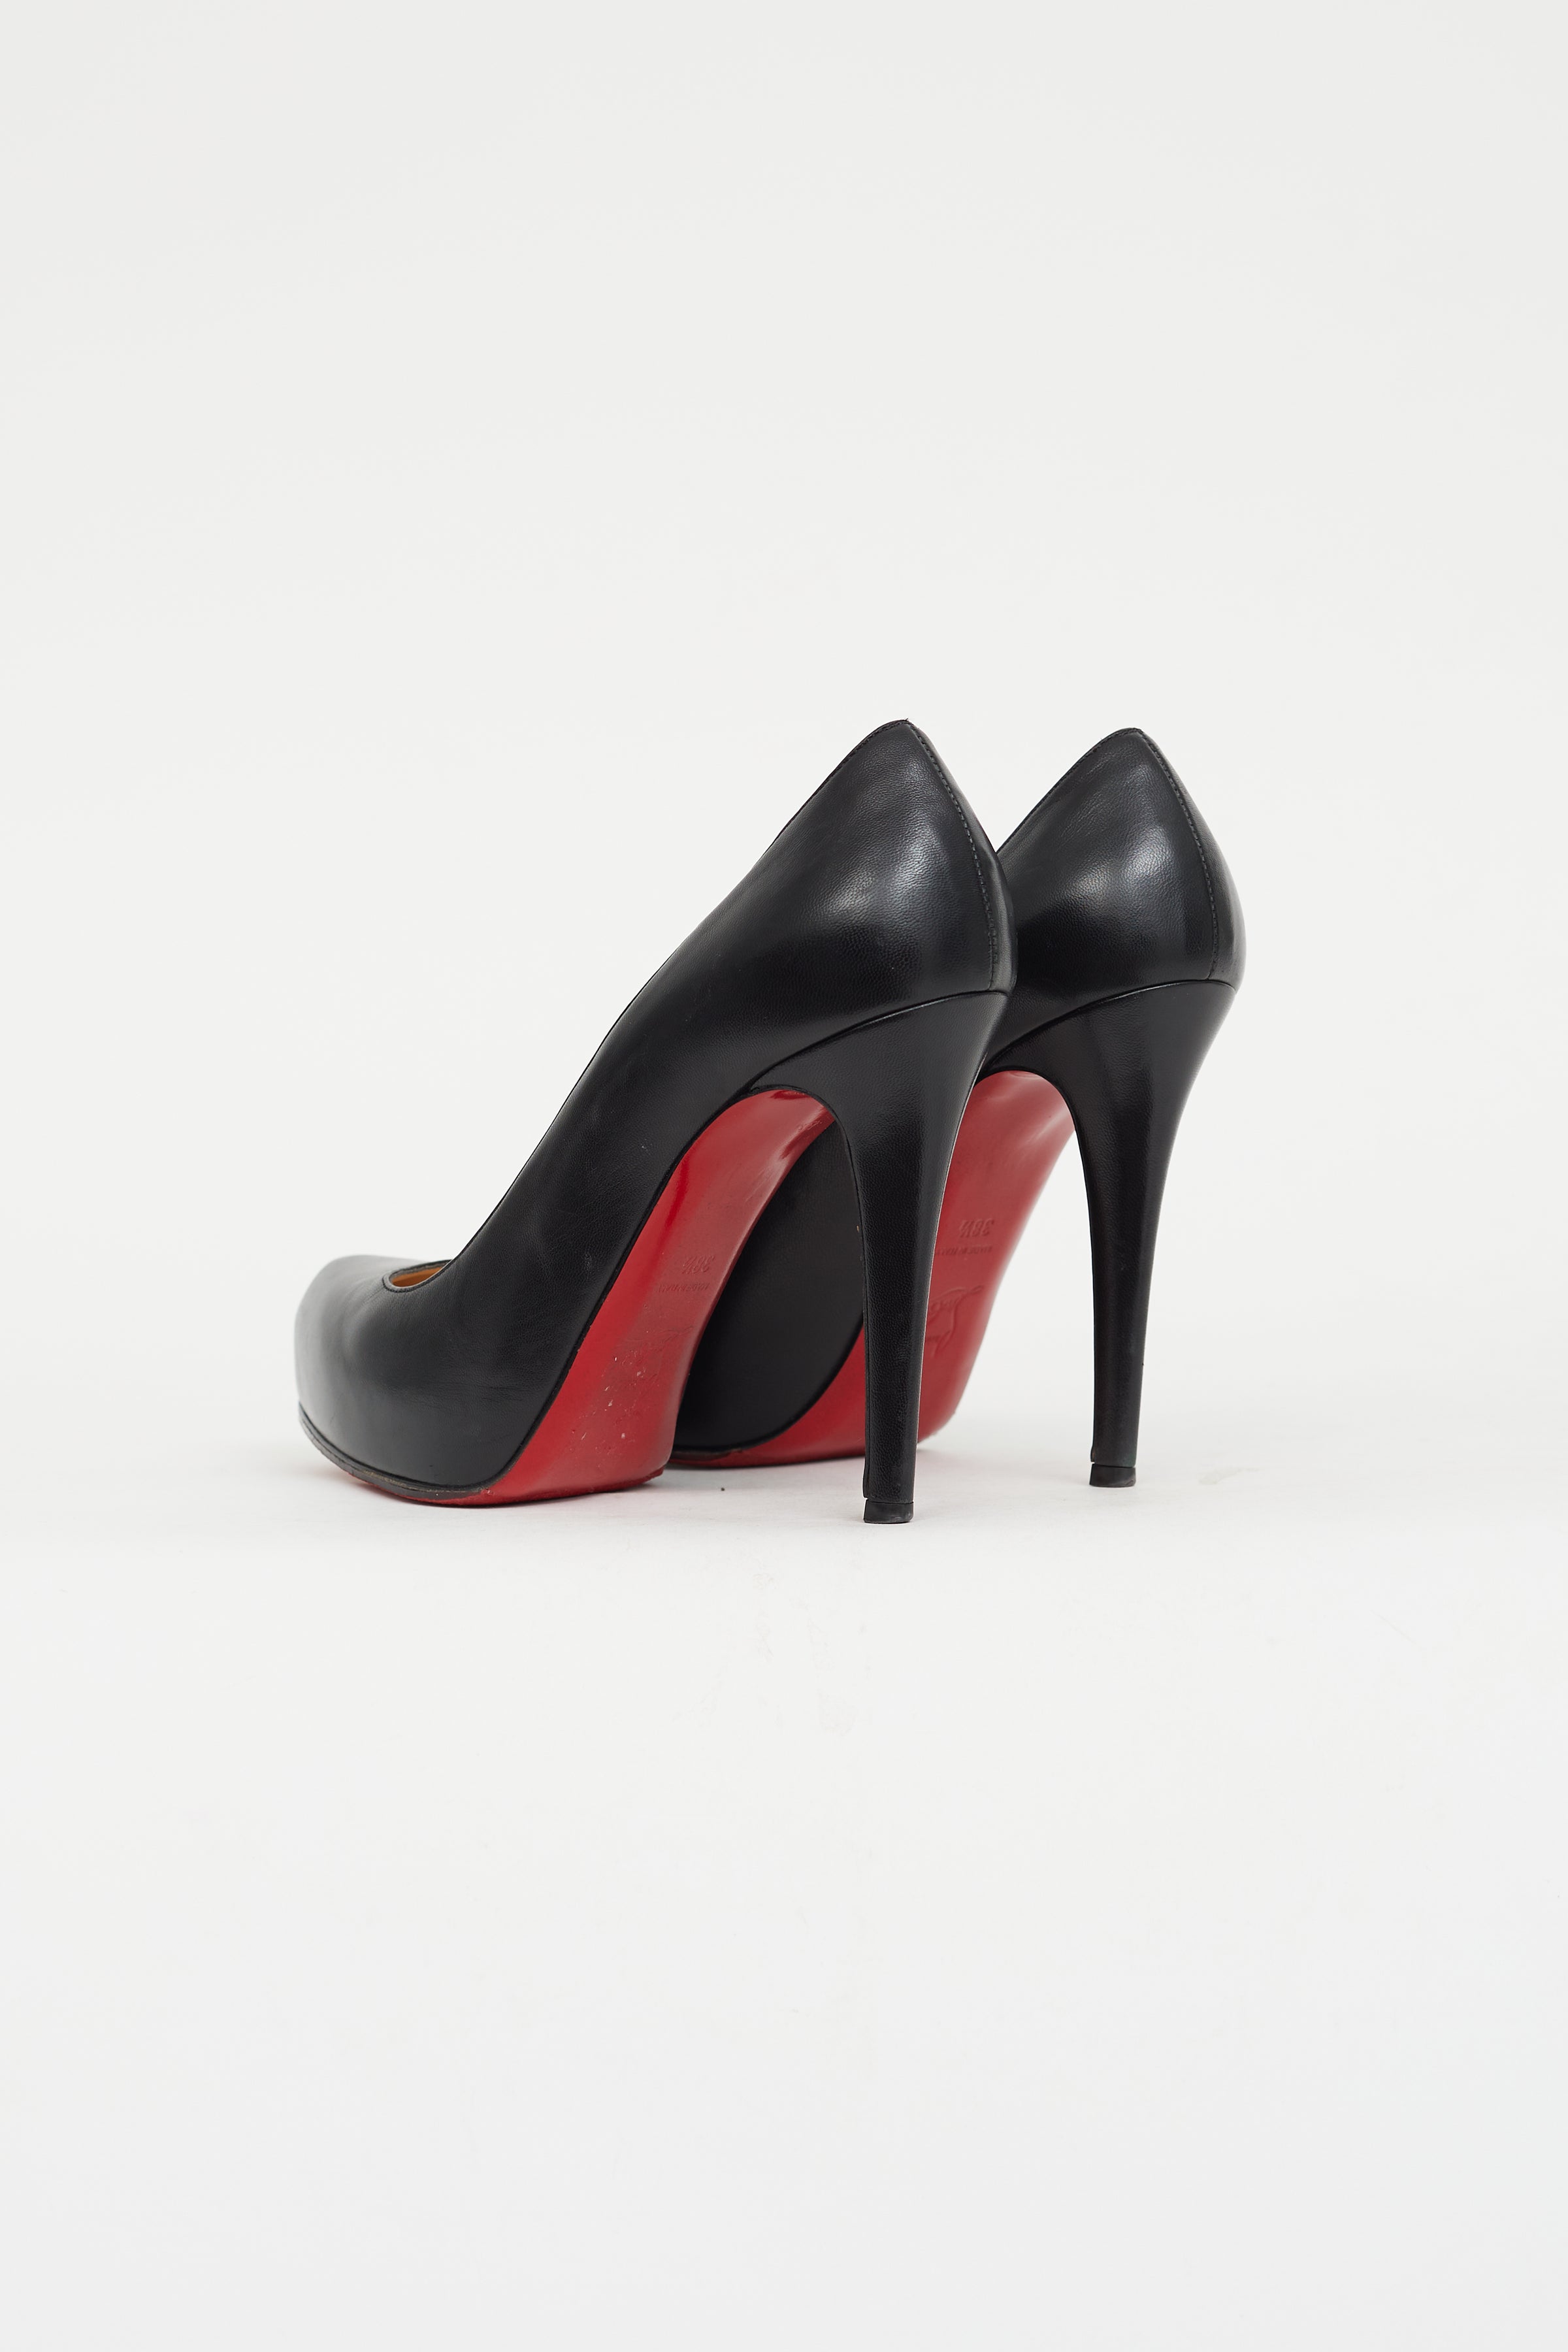 louis vuitton red bottom shoes collection!  Louis vuitton shoes heels, Red  bottom shoes, Heels